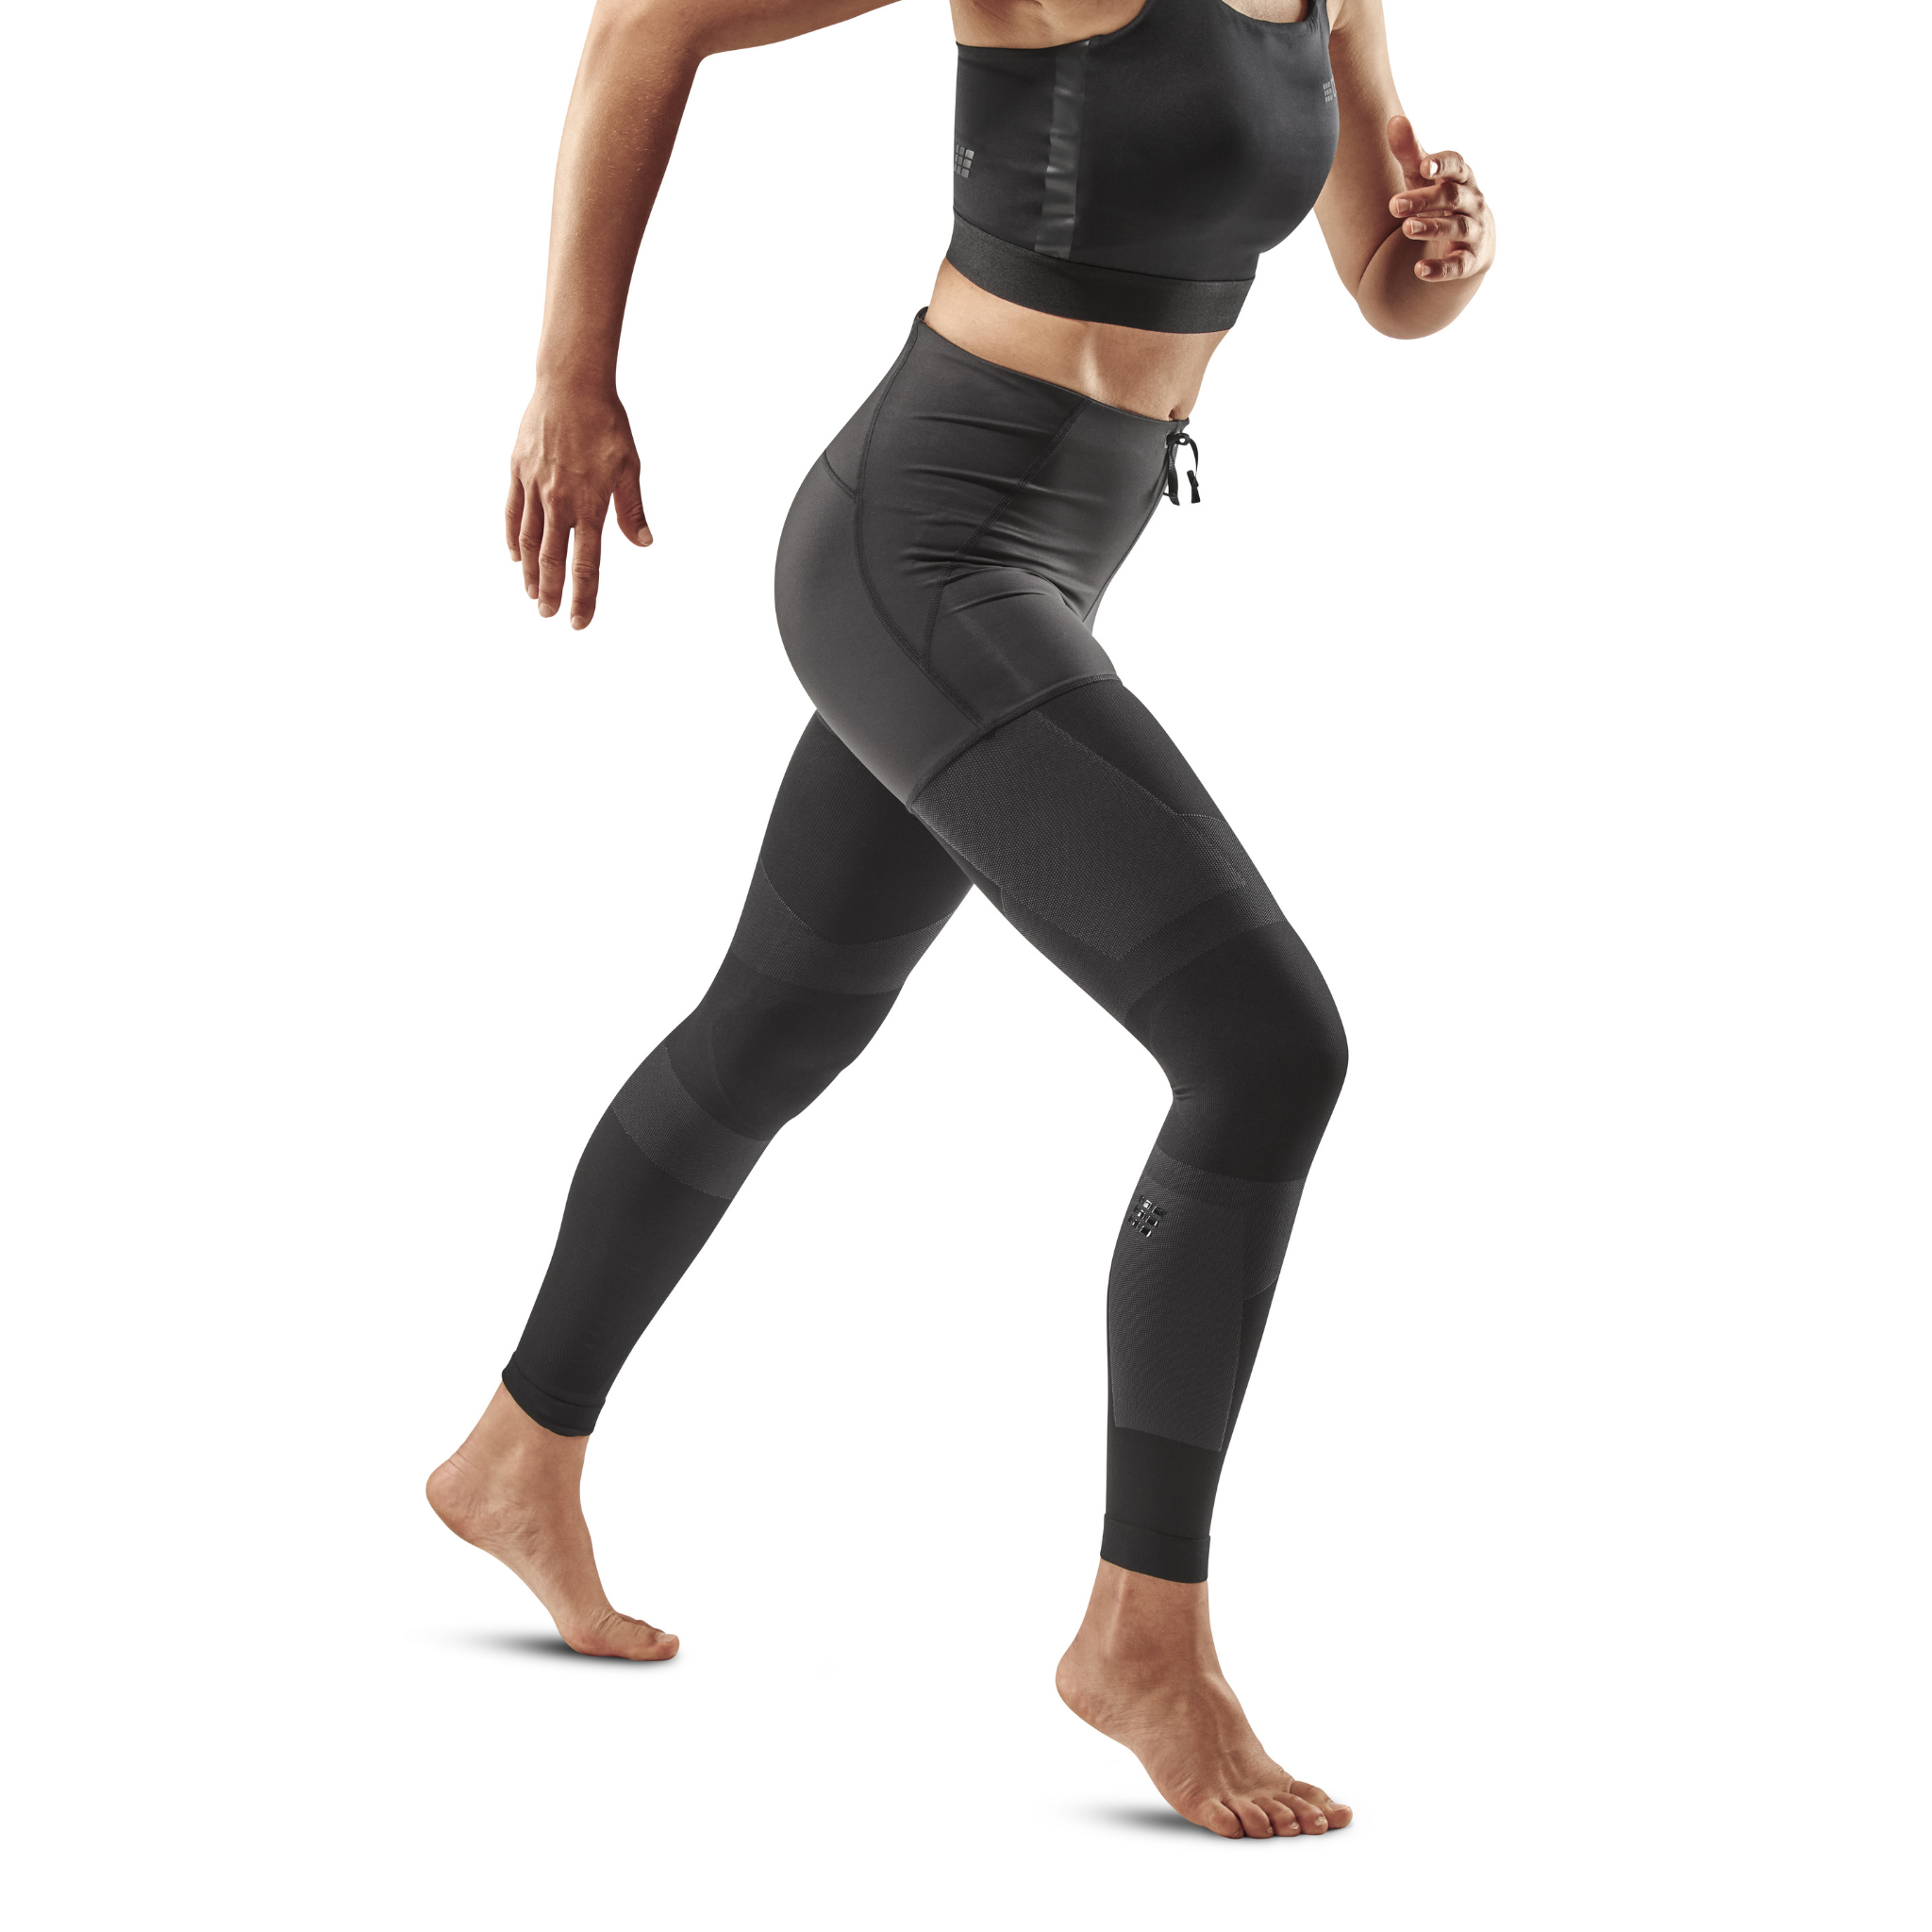 Stretch Support Tights, all Tights